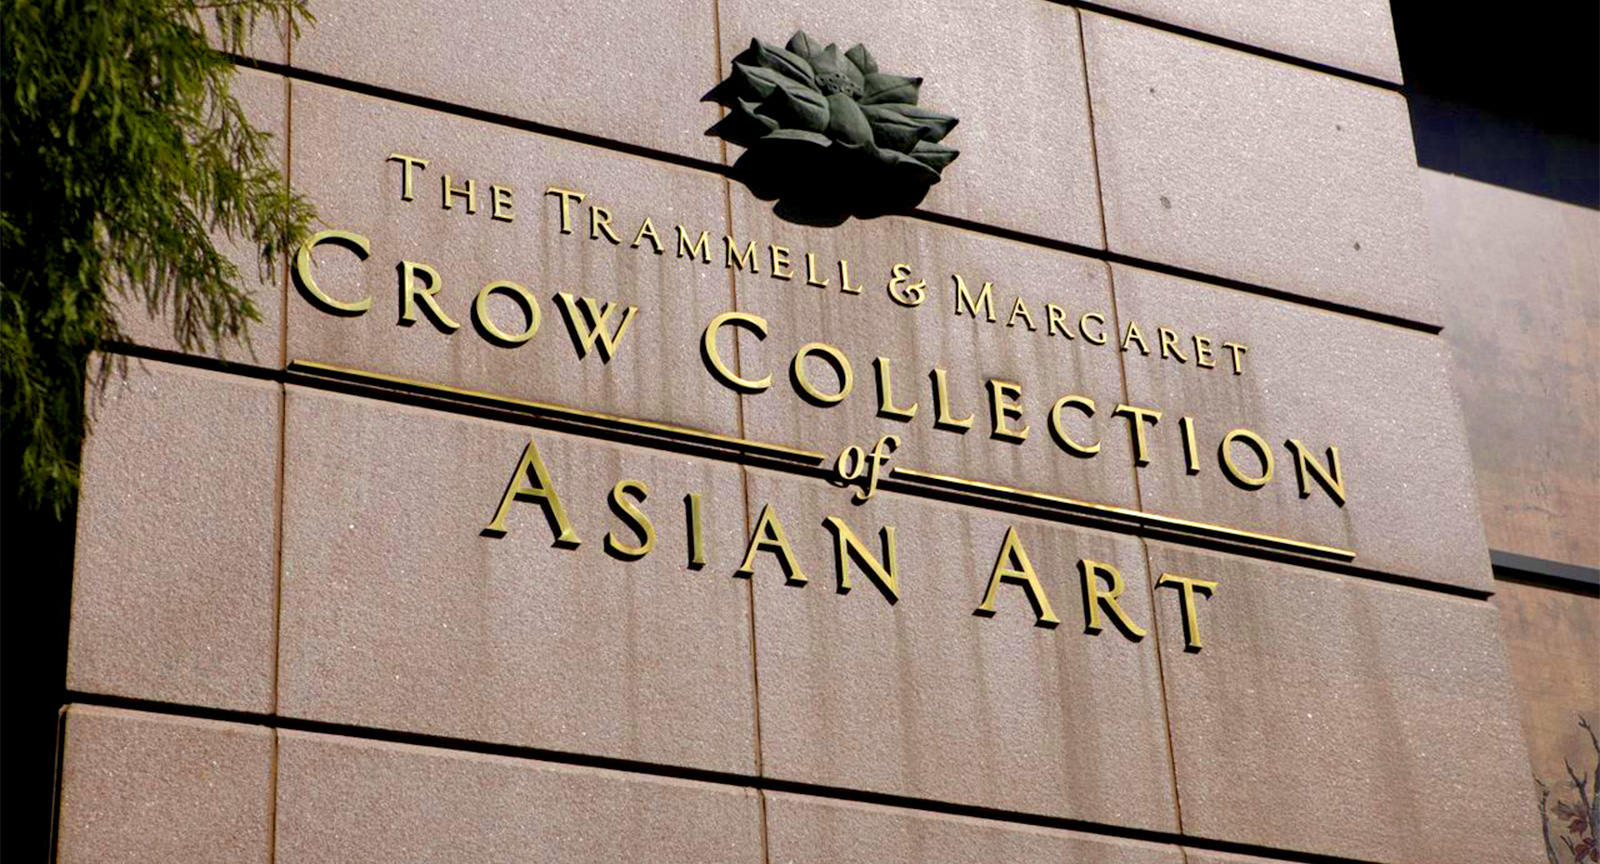 Crow Collection Of Asian Art Launches New Wellness Institute And Announces Jacqueline Buckingham Anderson As Director